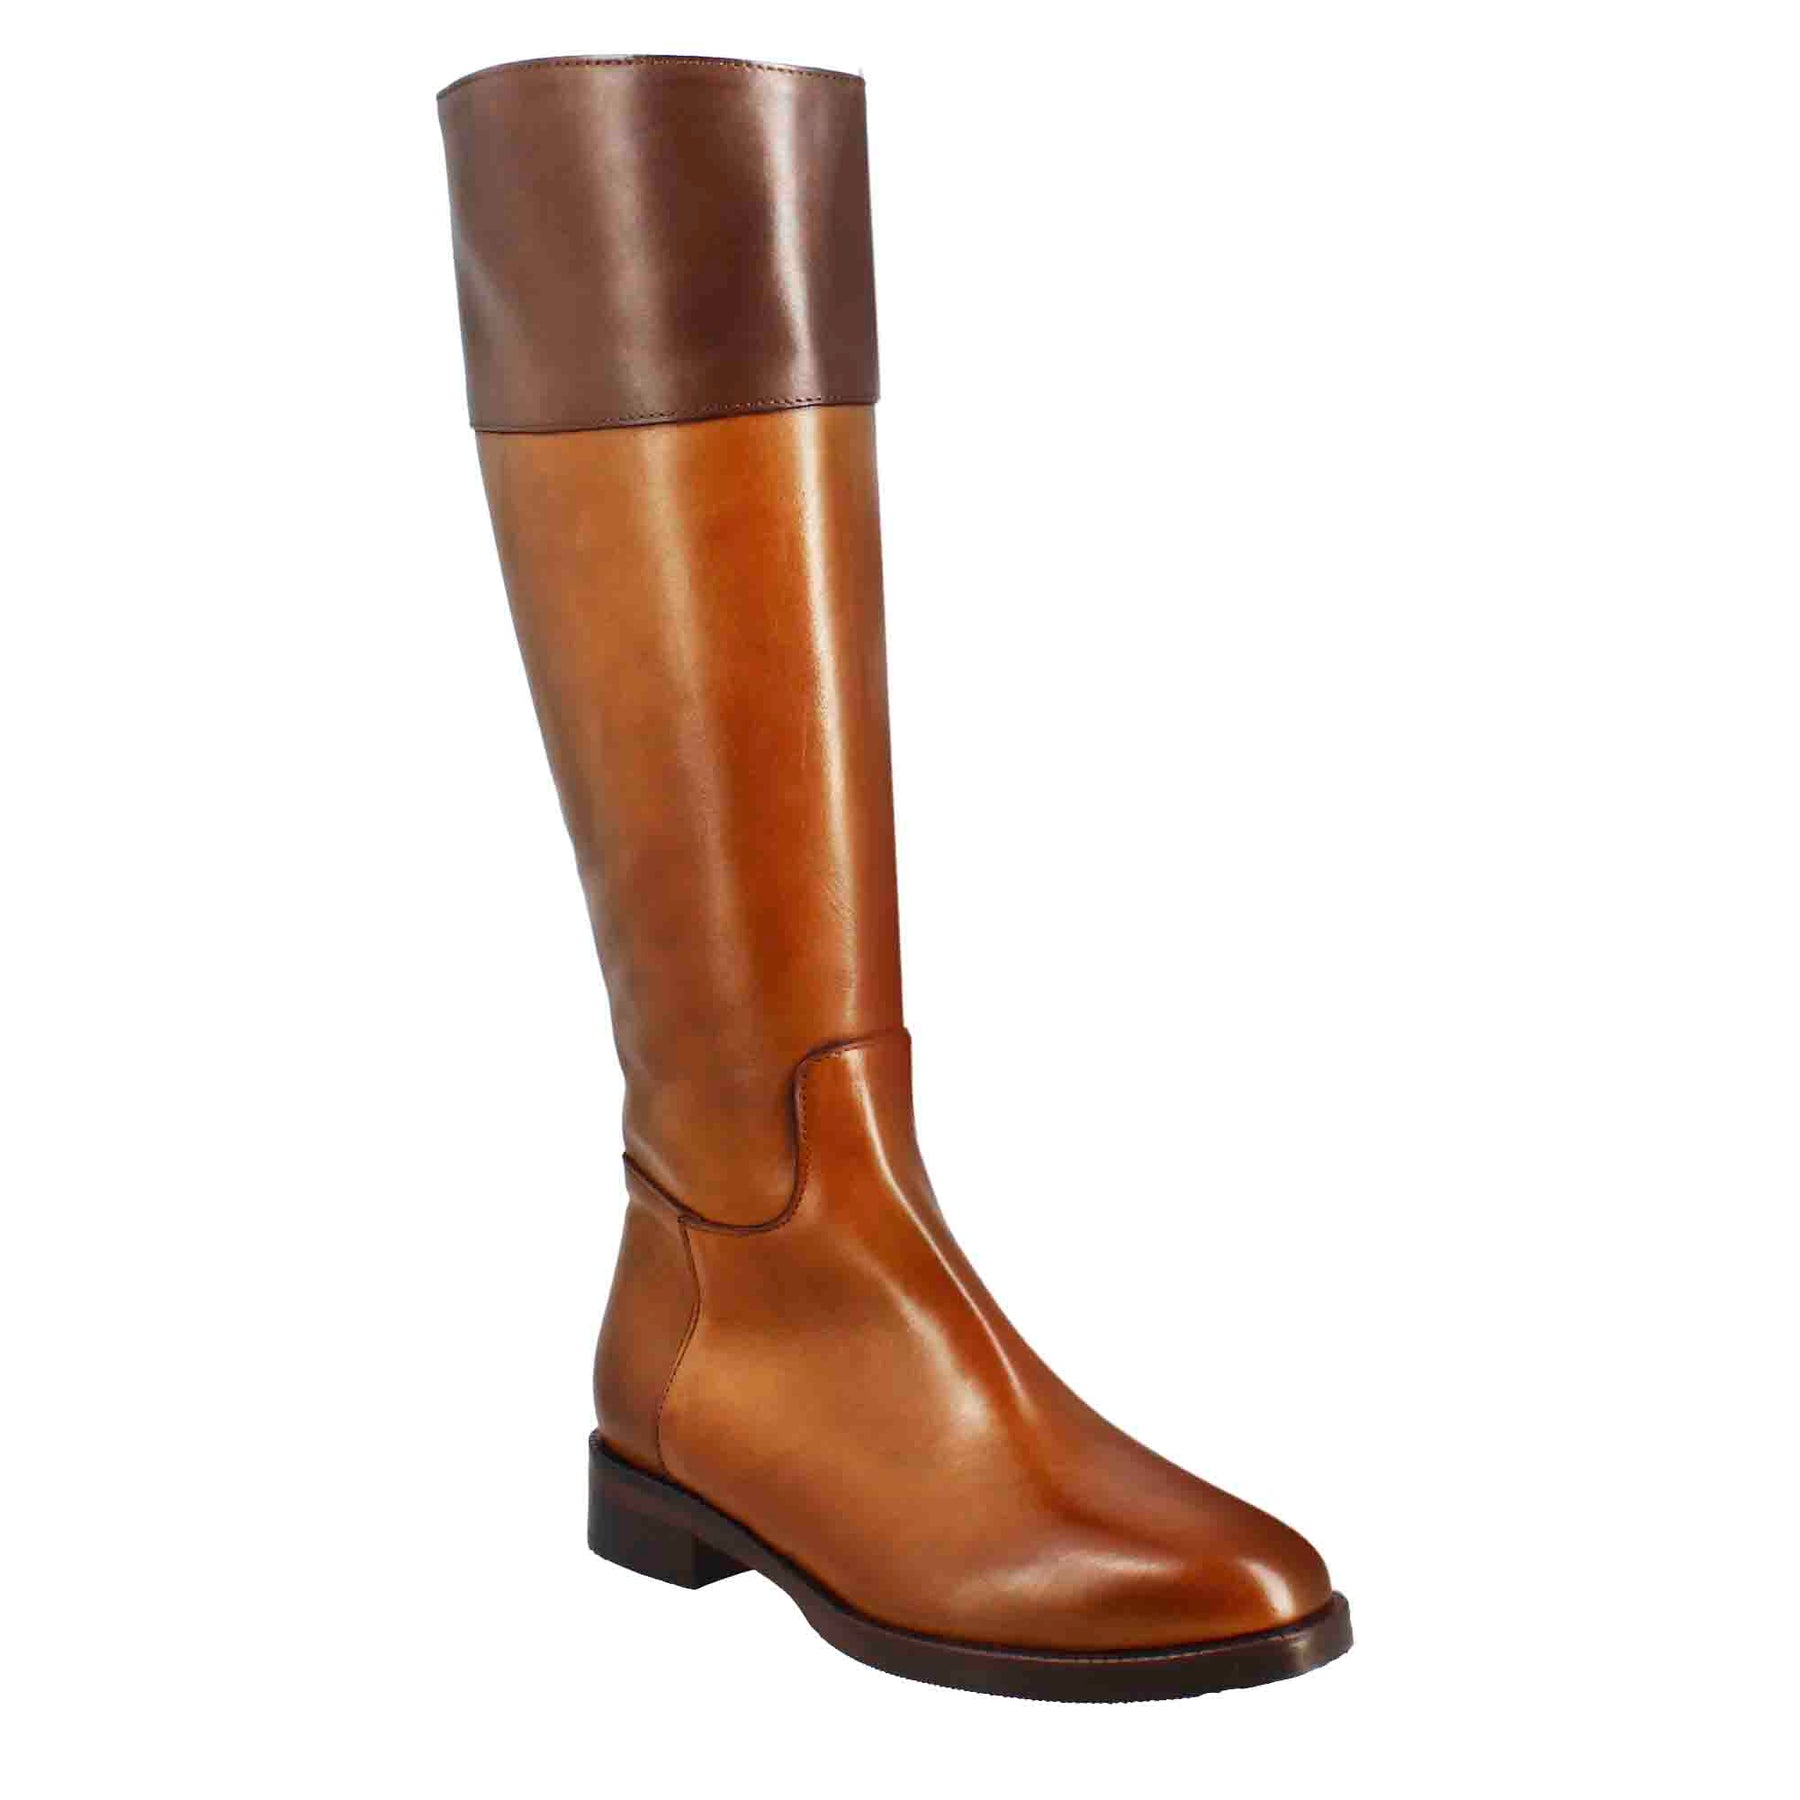 Smooth women's knee-high boot with low heel in brown and dark brown leather